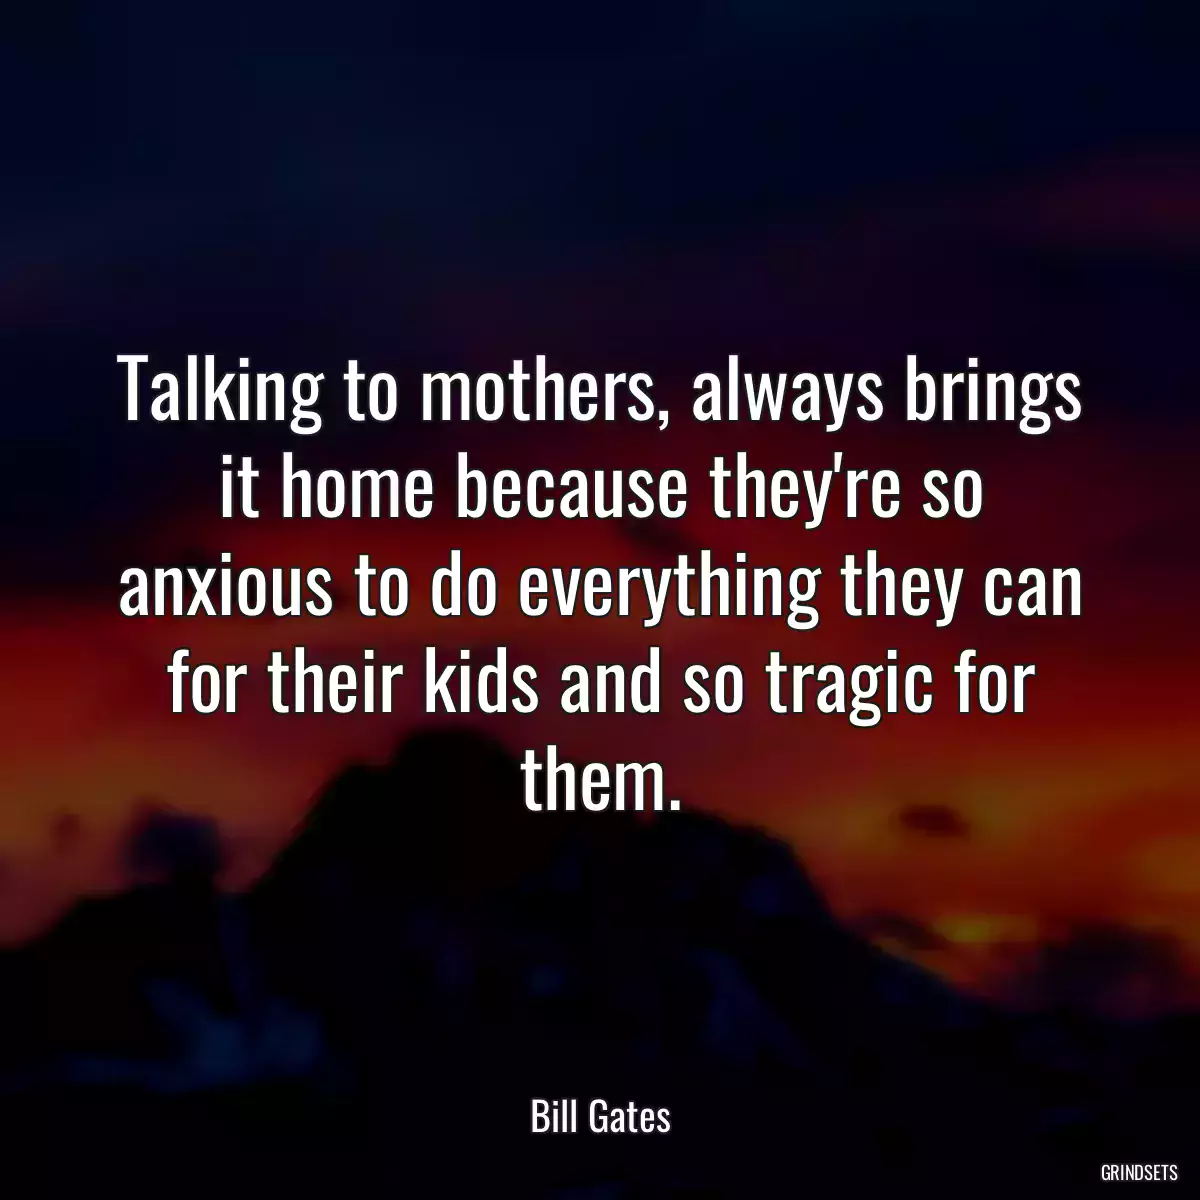 Talking to mothers, always brings it home because they\'re so anxious to do everything they can for their kids and so tragic for them.